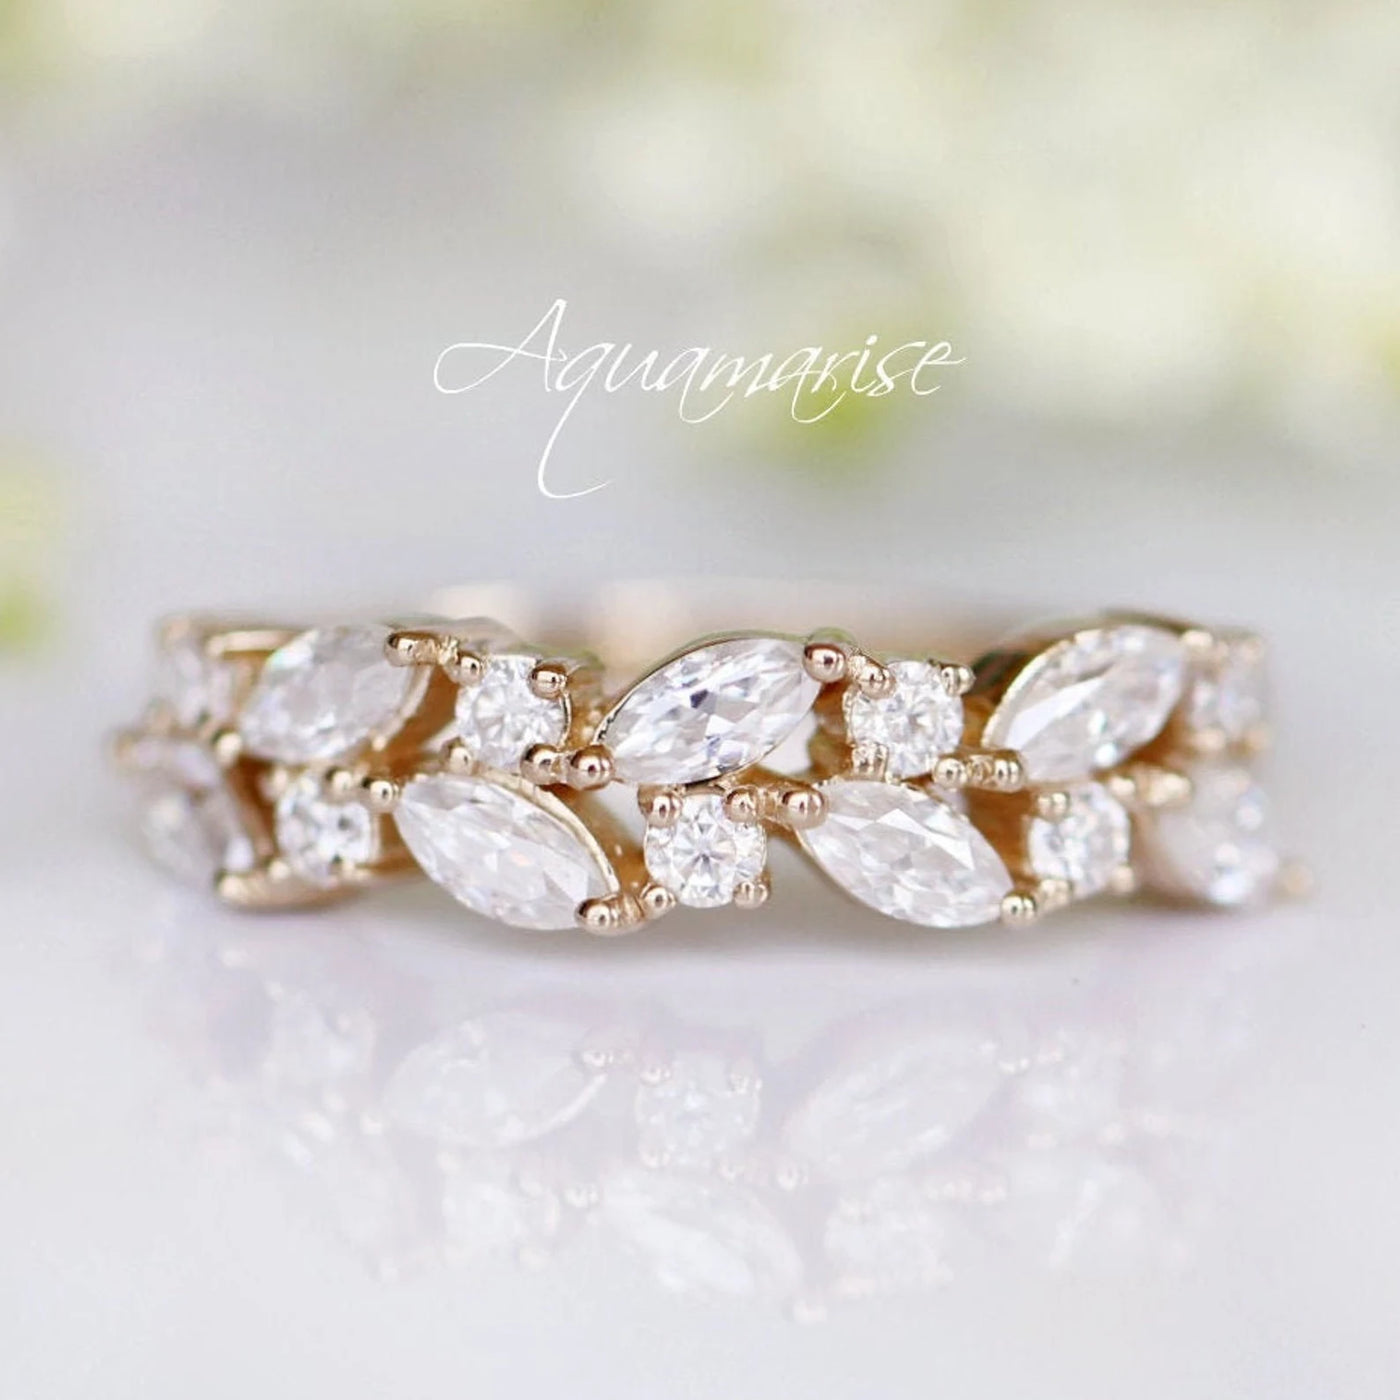 Vintage  Marquise Moissanite or Diamond Wedding Band - 14K Solid Yellow Gold